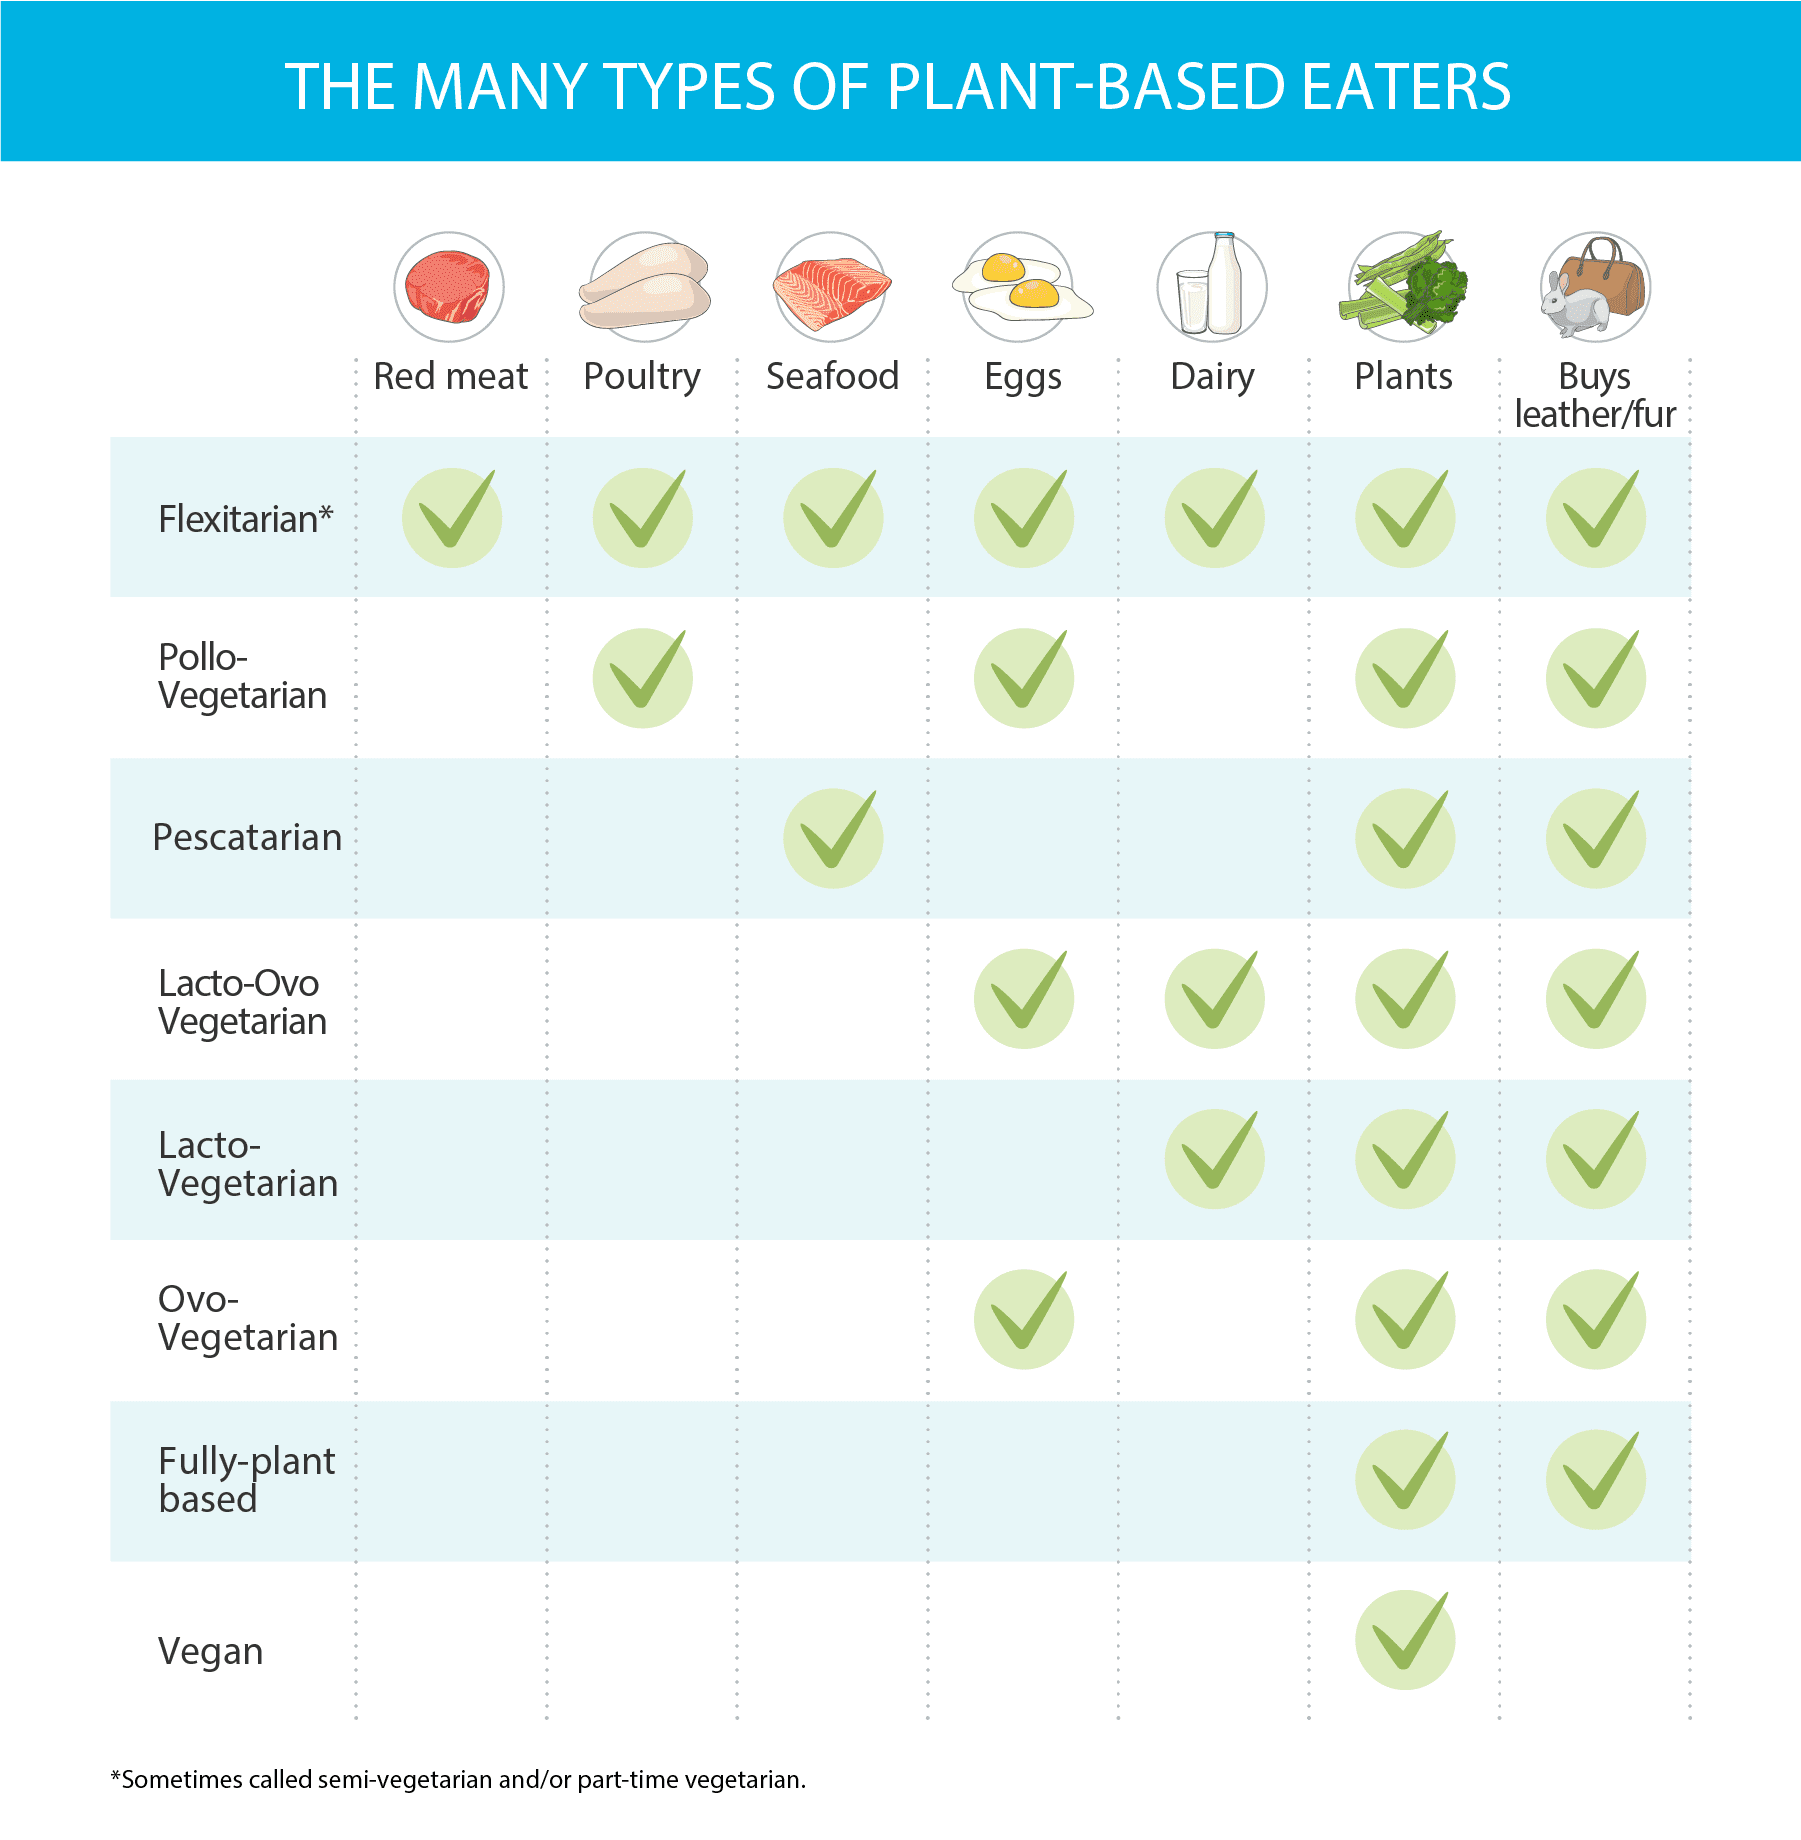 Chart shows what different types of plant-based eaters are willing to eat and/or do. 1) Flexitarian: red meat, poultry, seafood, eggs, dairy, plants, buy leather/furs; 2) Pollo-vegetarian: poultry, eggs, plants, buy leather/furs; 3) Pescatarian: seafood, plants, buy leather/furs; 4) Lacto-ovo vegetarian: eggs, dairy, plants, buy leather/furs; 5) Lacto-vegetarian: dairy, plants, buy leather/furs; 6) Ovo-vegetarian: eggs, plants, buy leather/furs; 7) Fully-plant based: plants, buy leather/furs; 8) Vegan: plants